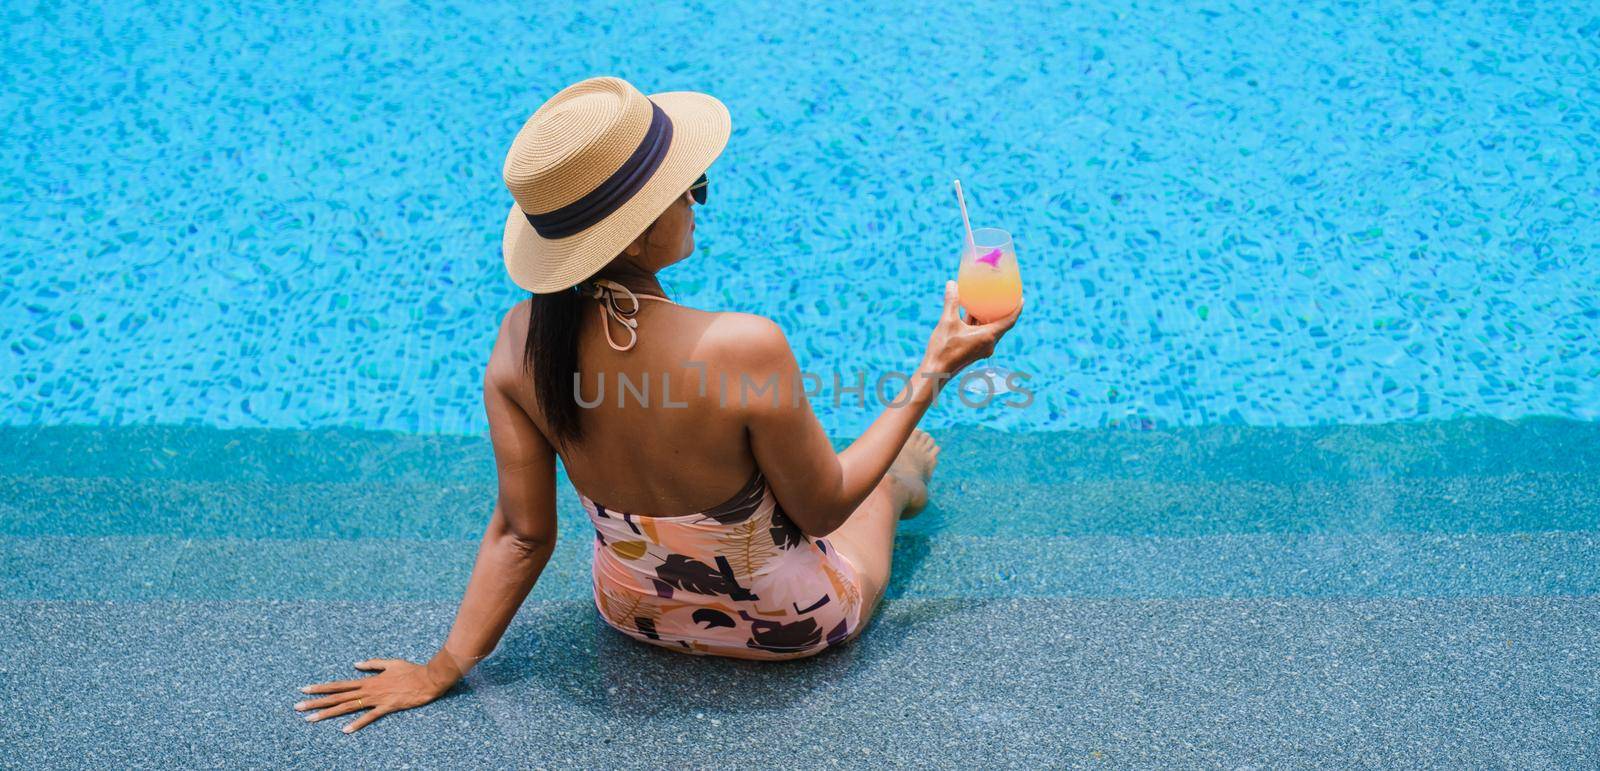 Asian women with a hat relaxing in the swimming pool with a cocktail in hand, women swimming pool banner holiday vacation concept, Asian women in blue swimming pool luxury vacation